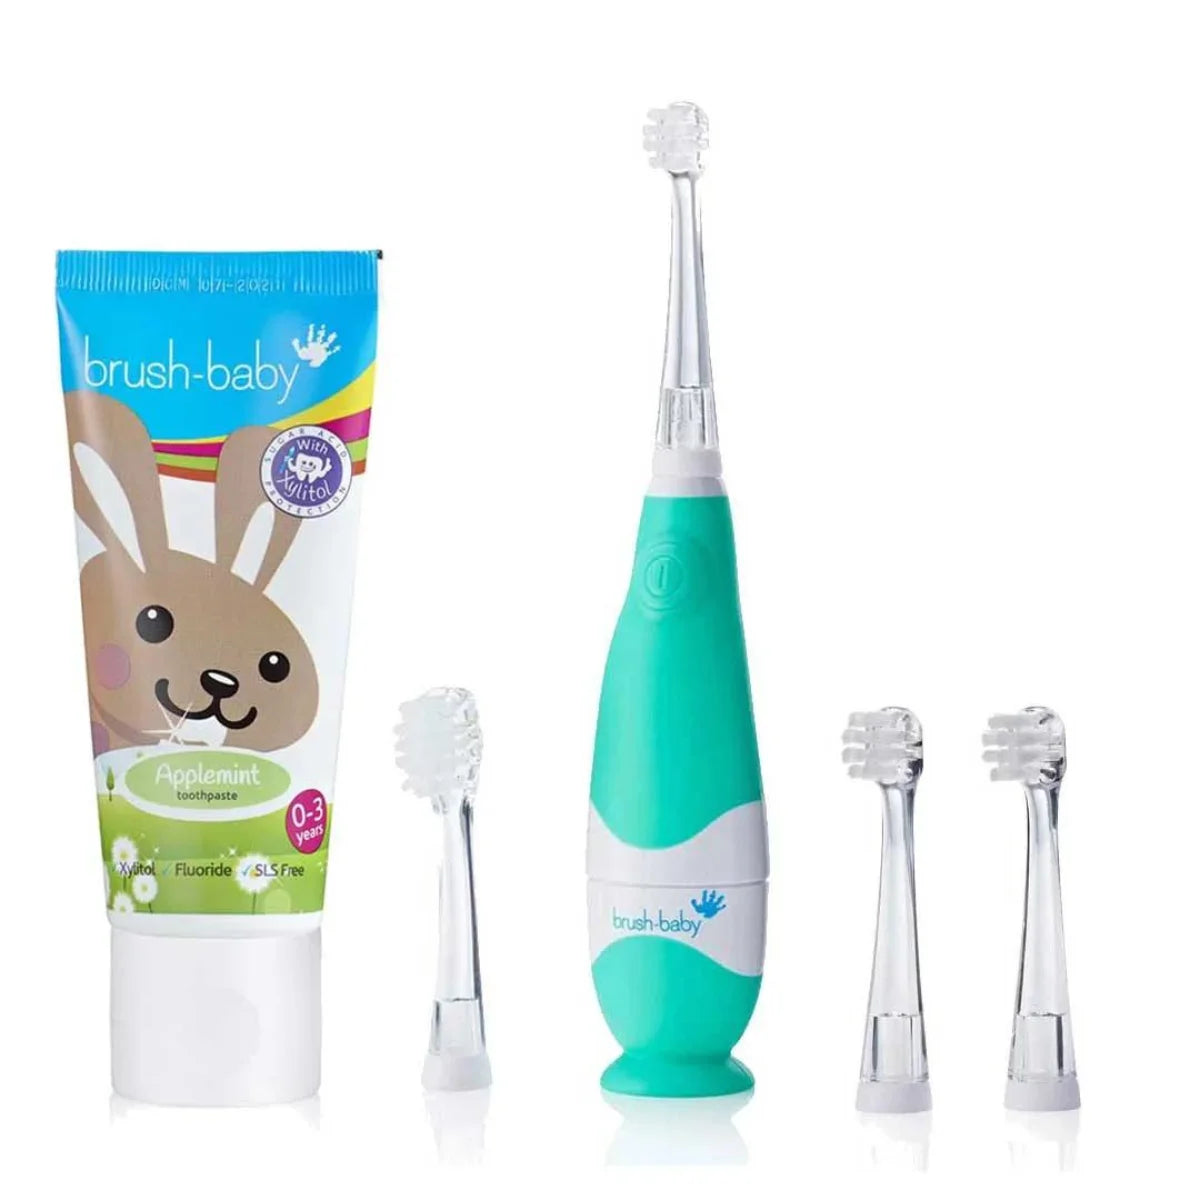 brushbaby teal Toddler smiles toothcare bundle  baby sonic electric toothbrush and applemint flavoured toothpaste for children 0-3 year olds